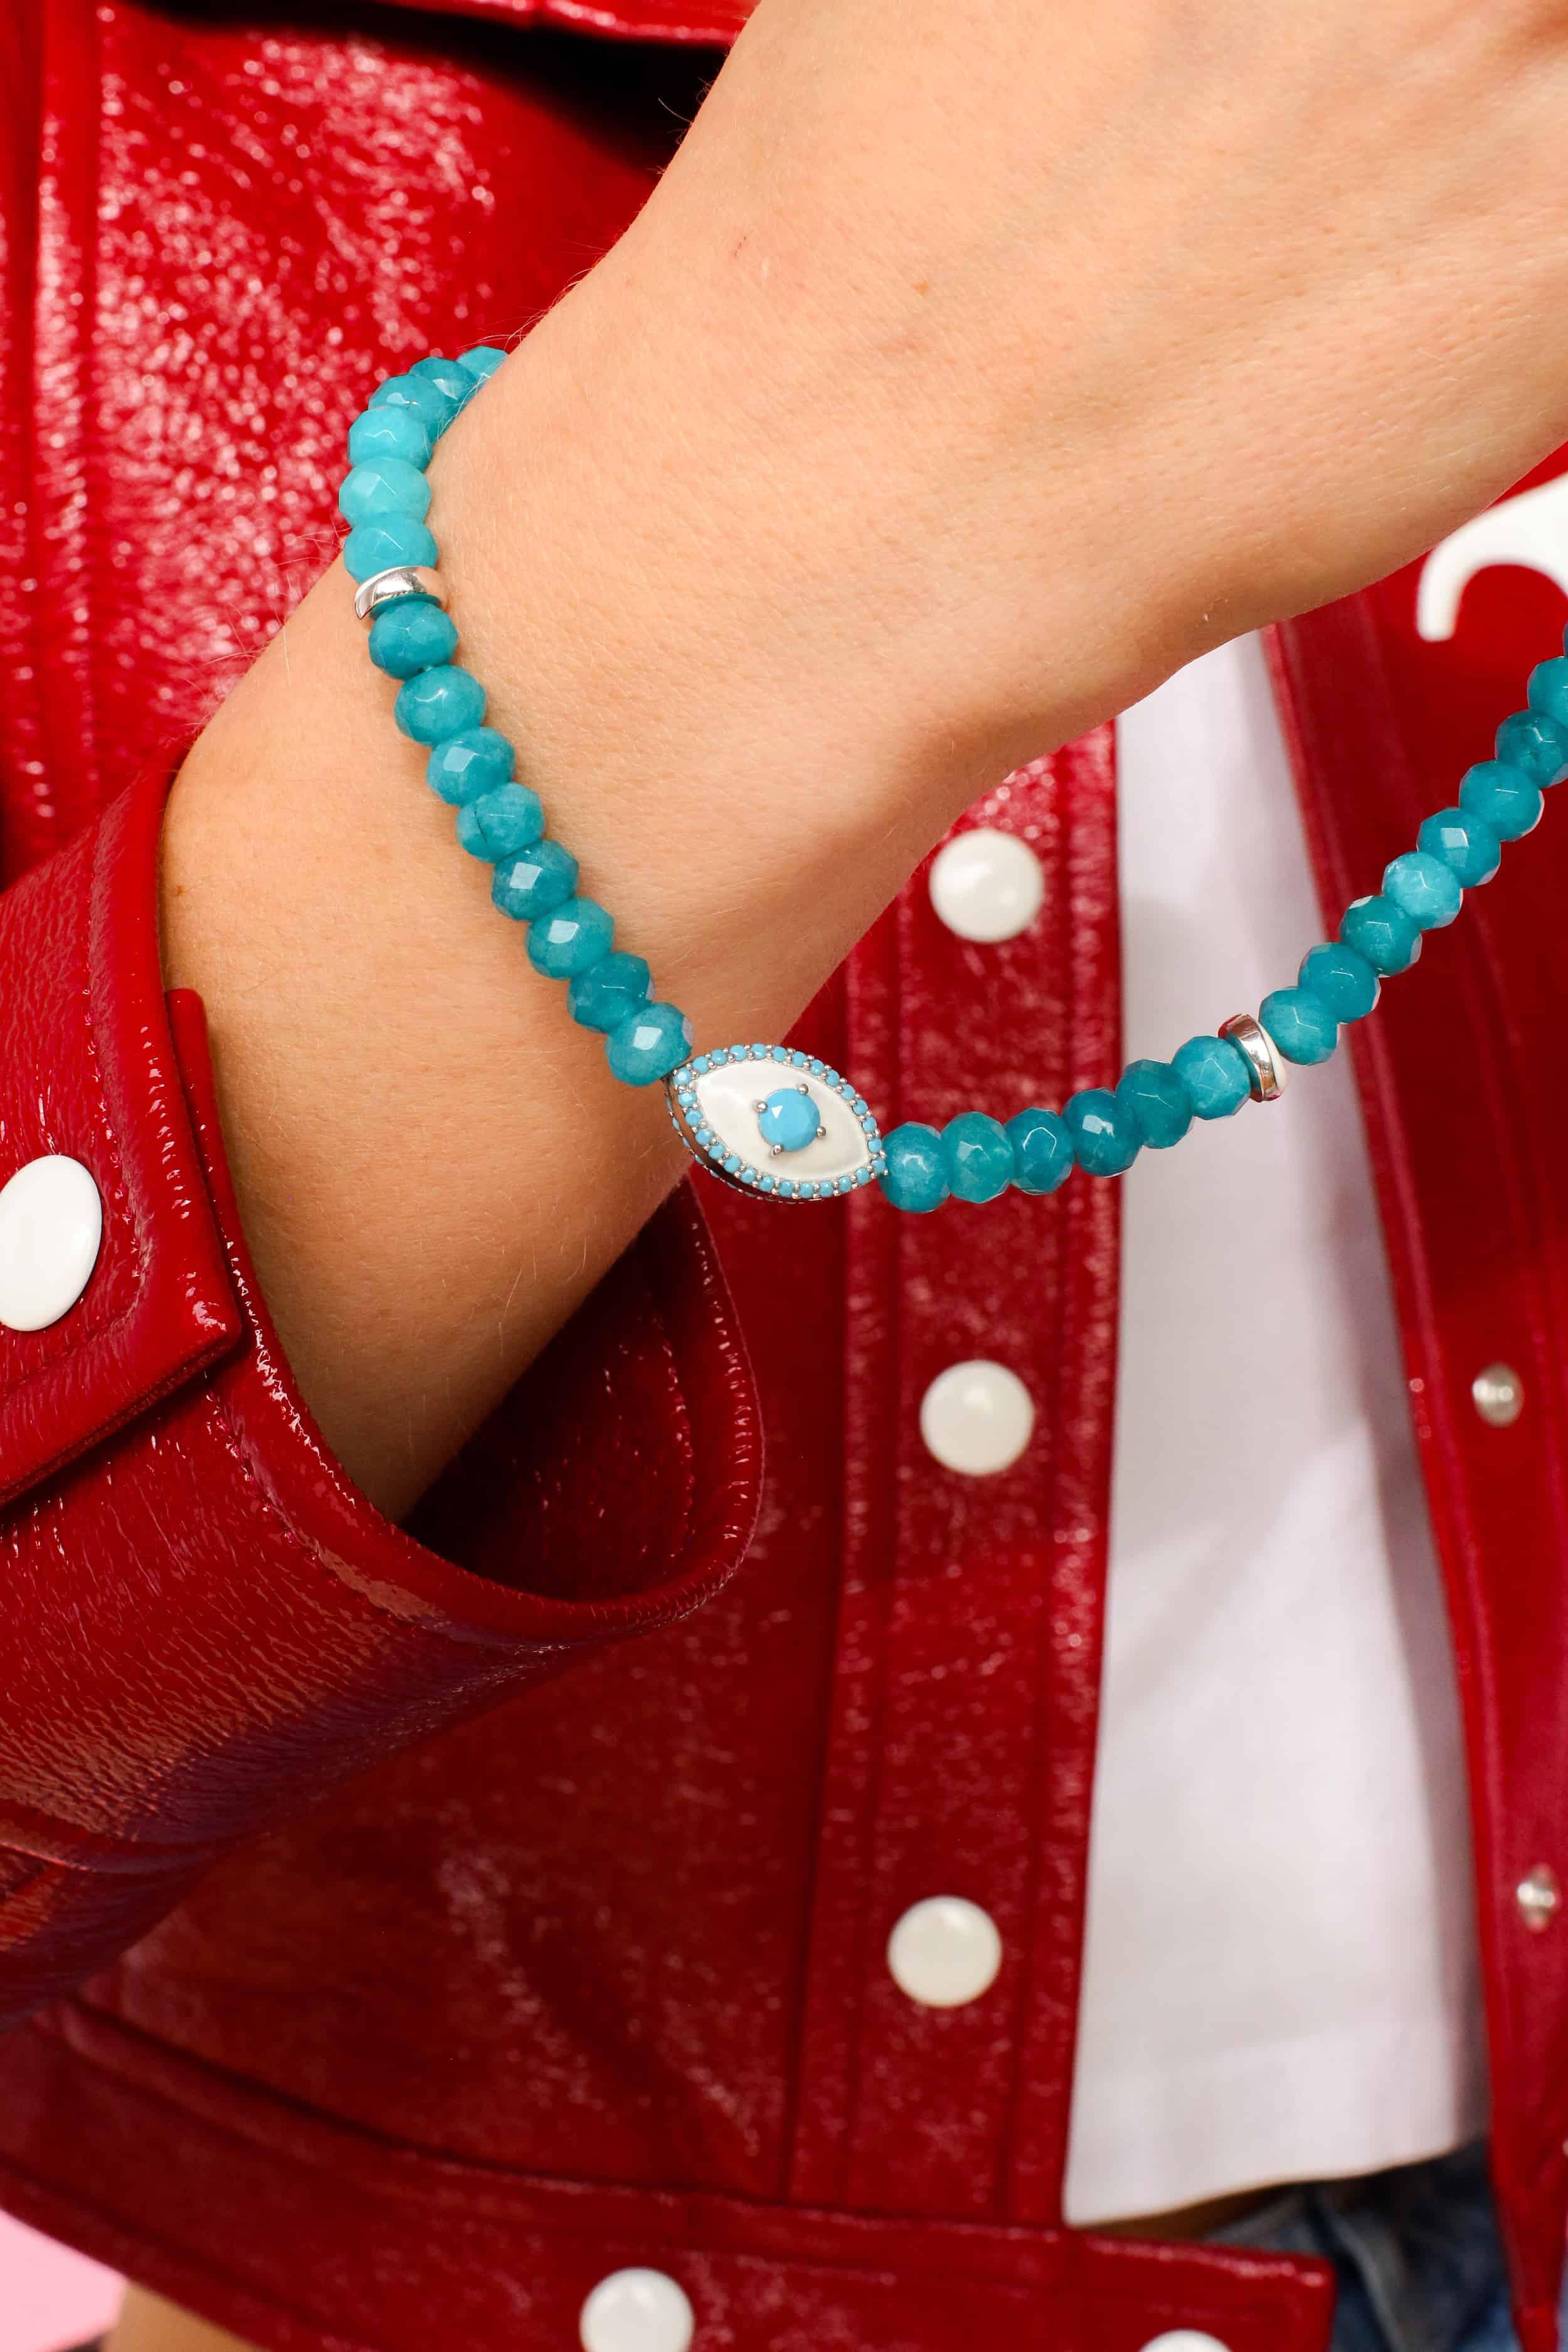 a close-up of a turquoise quartz phone strap around a woman's wrist